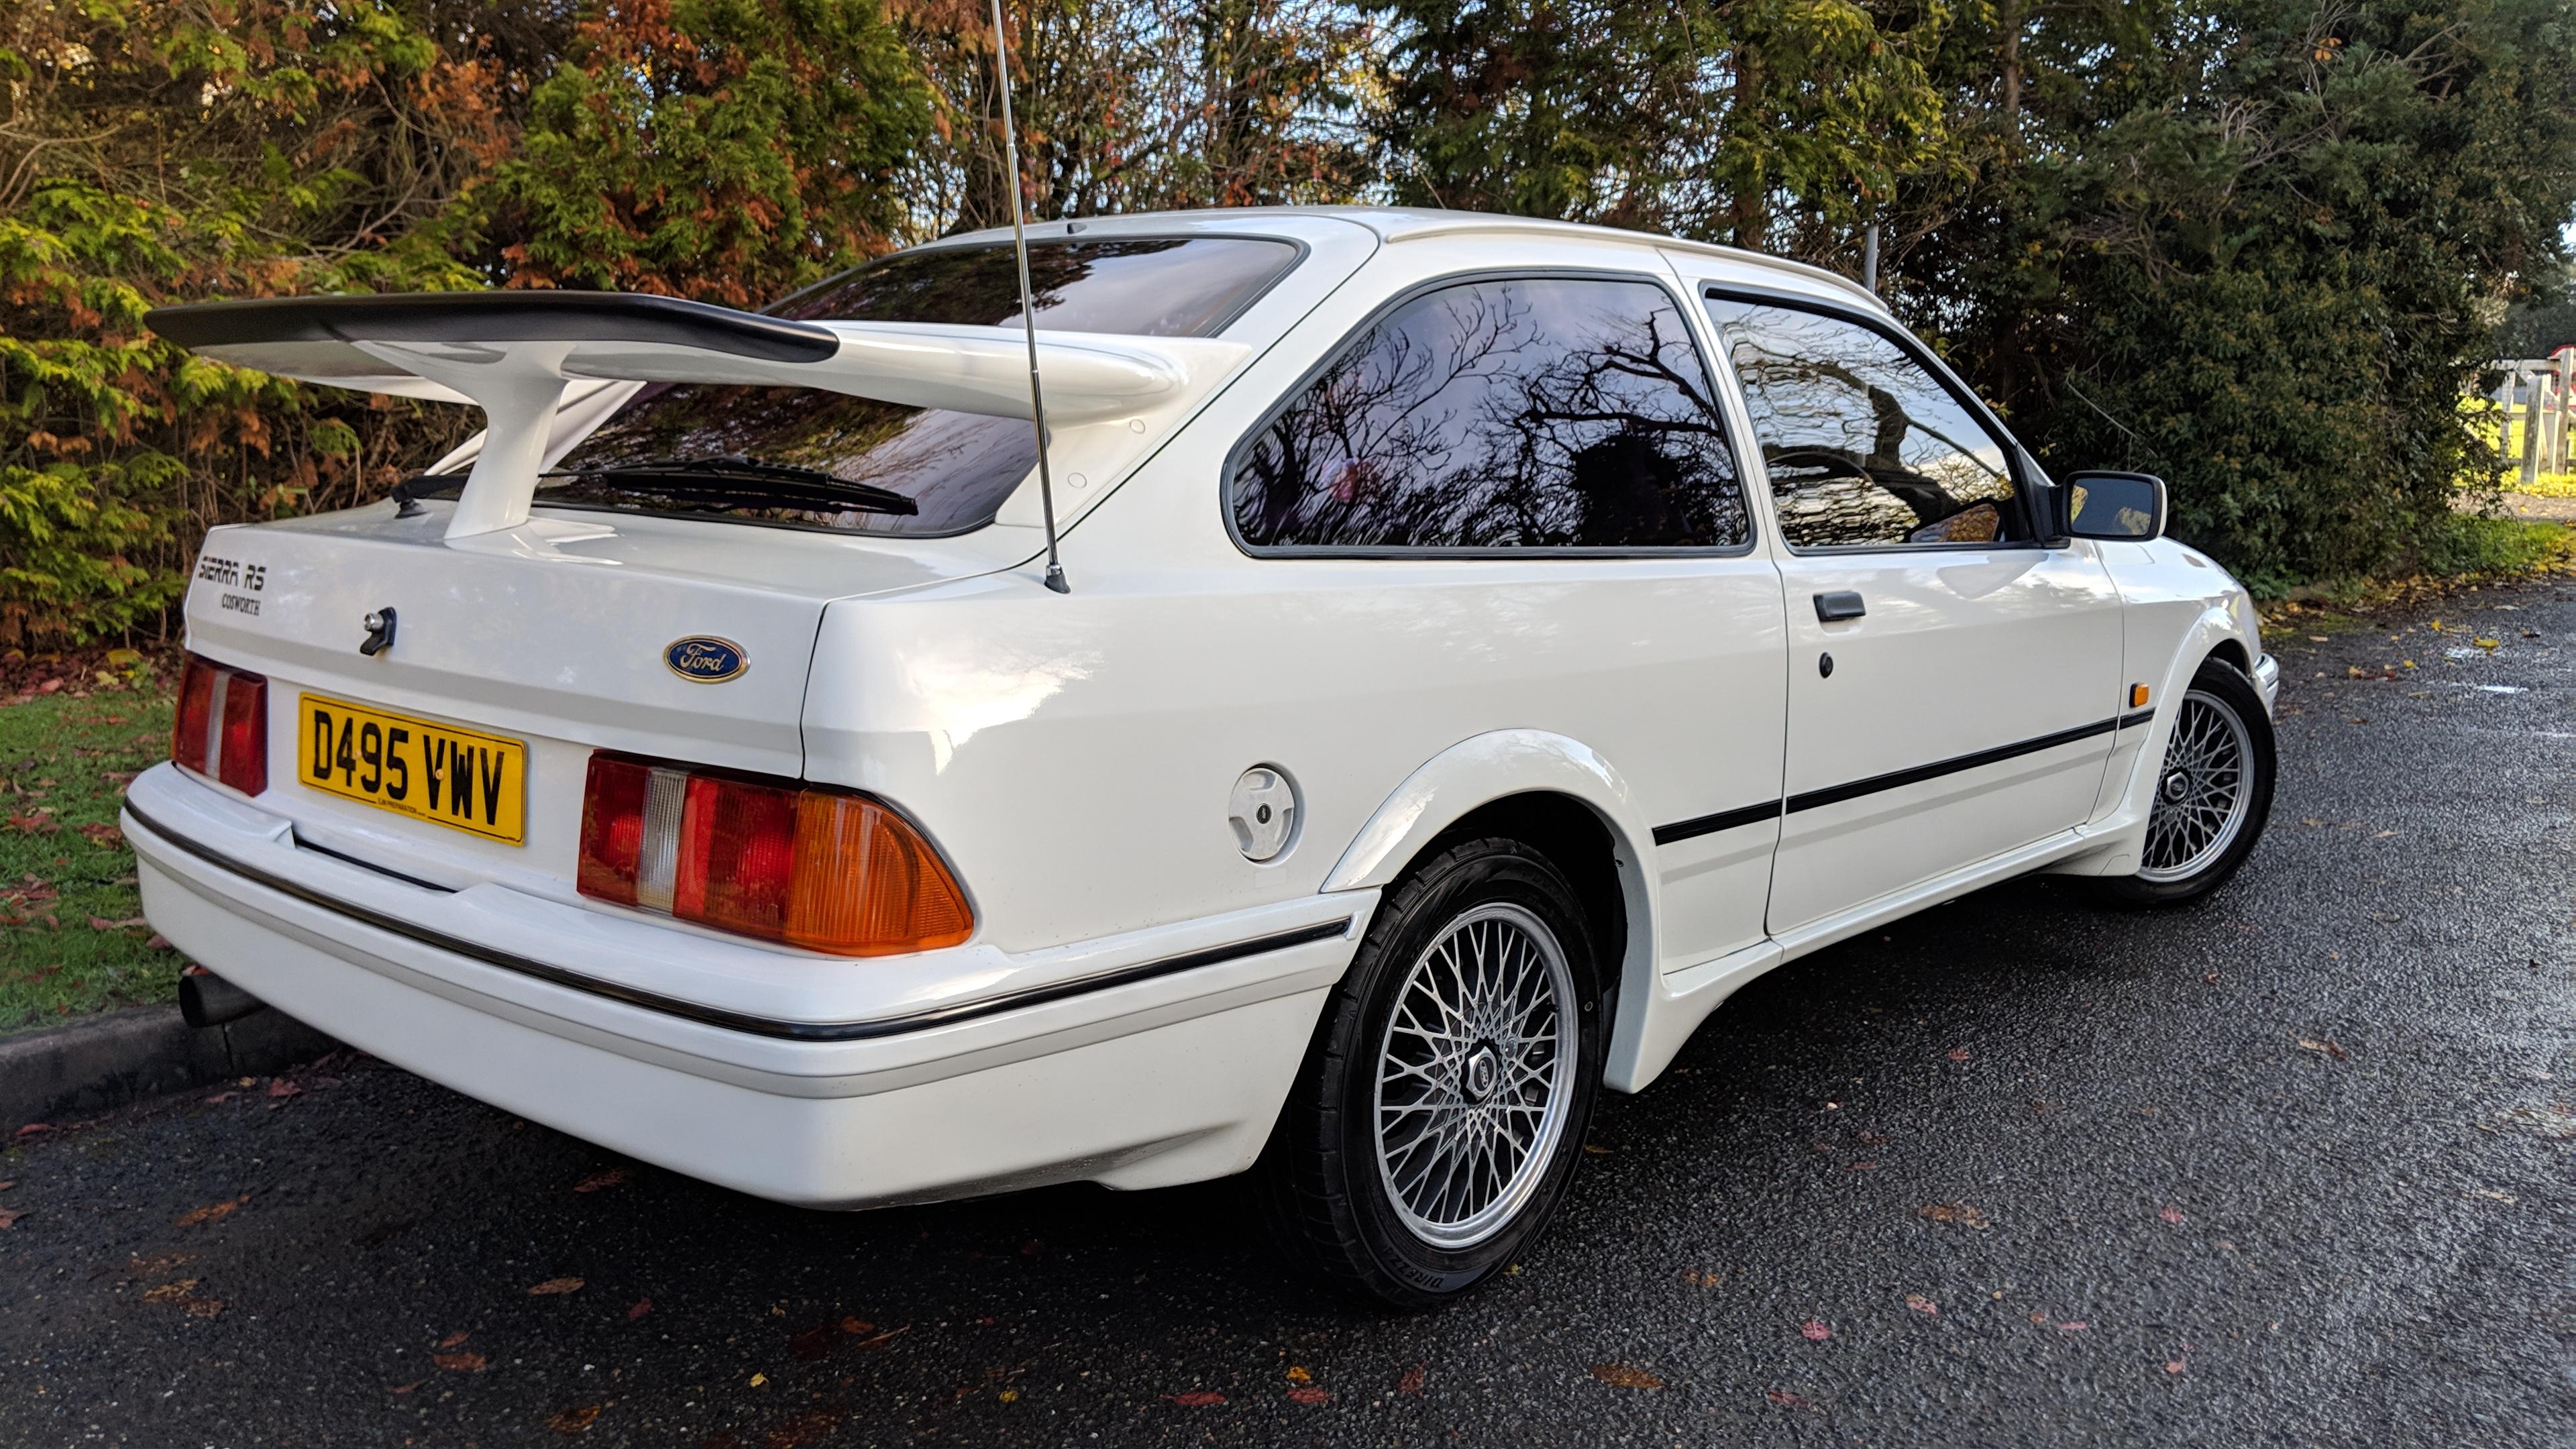 1986 Ford Sierra RS Cosworth